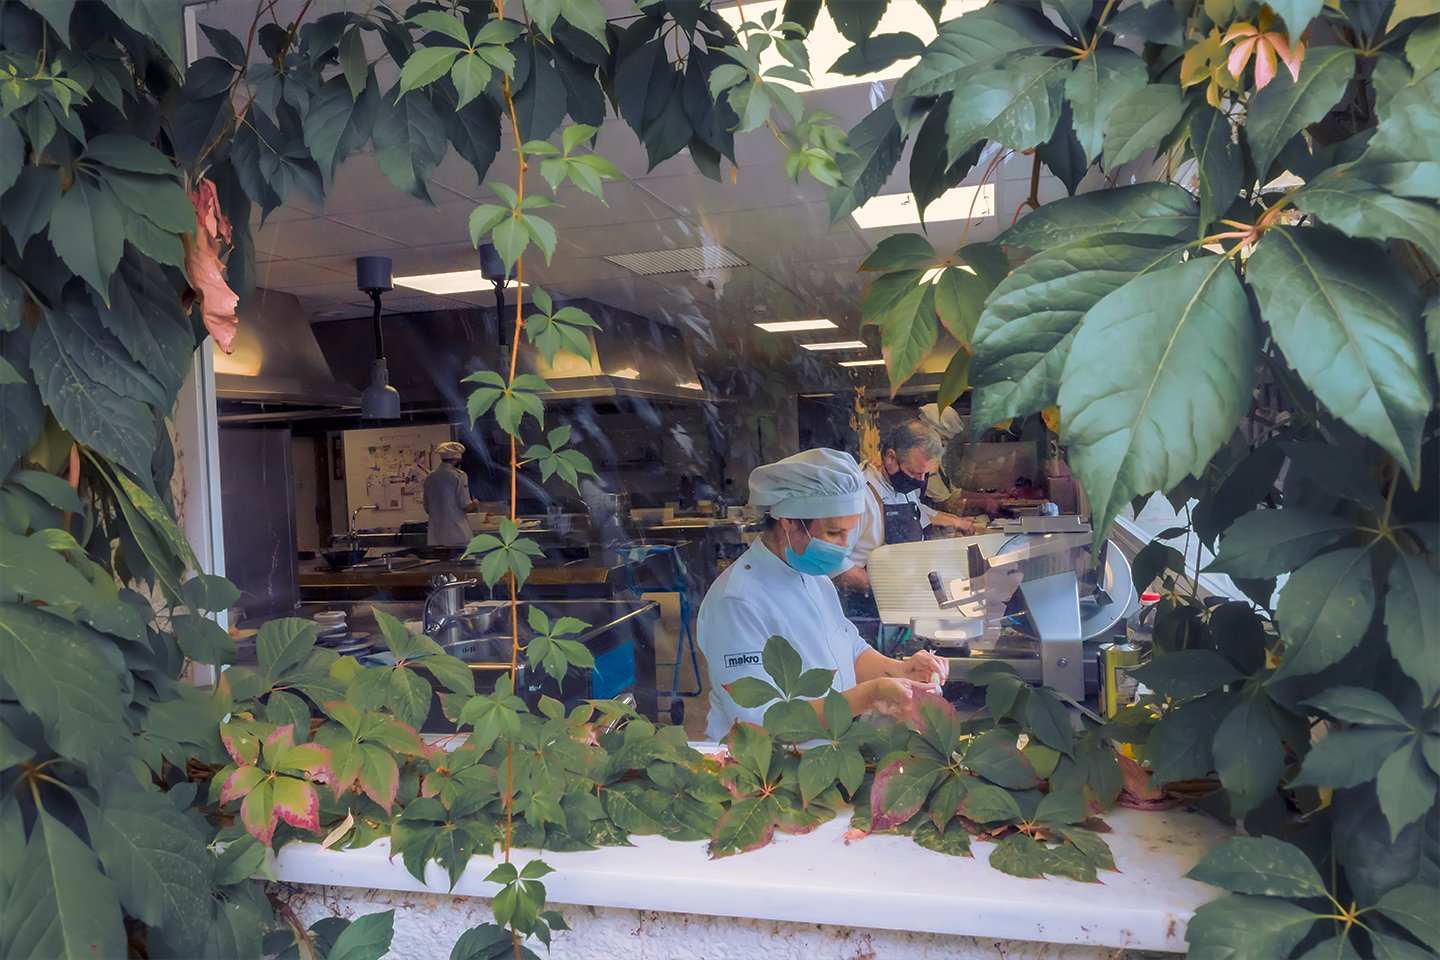 Image of a cook working behind a vertical garden.